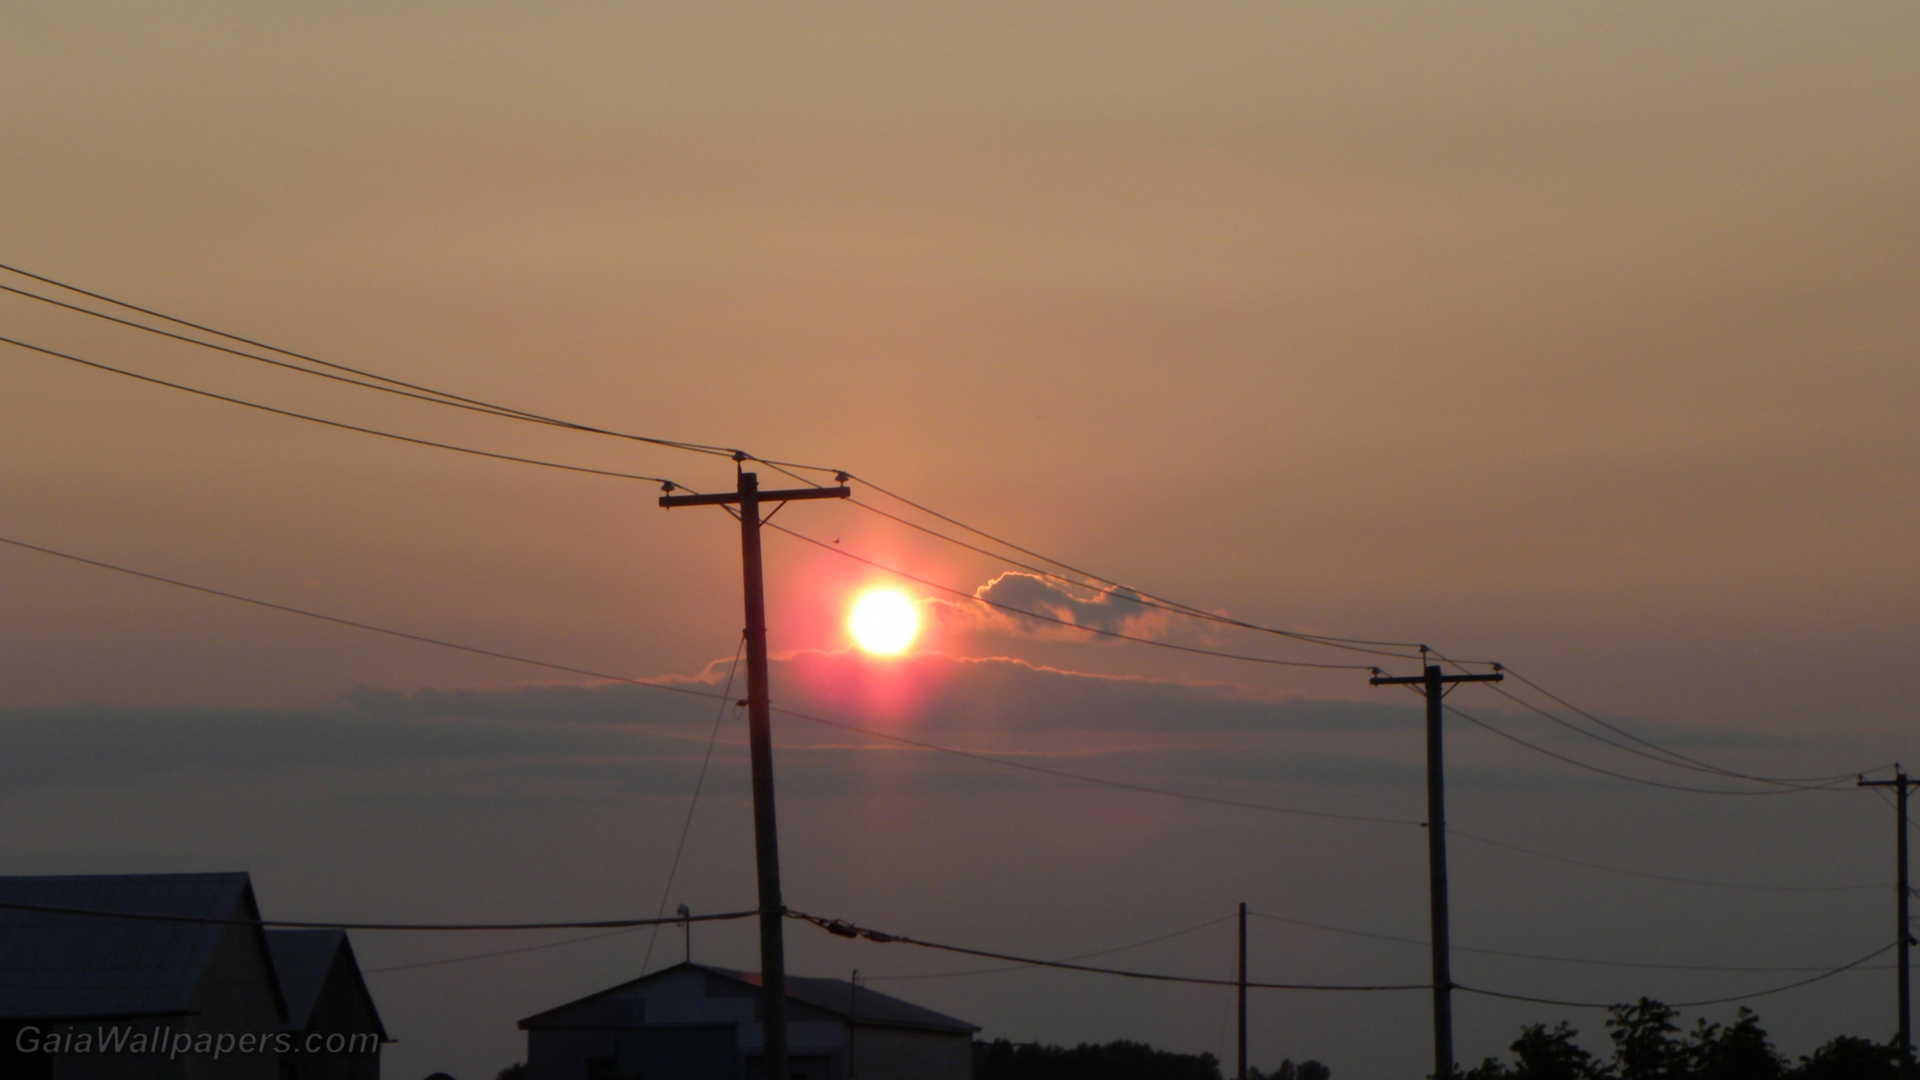 Sunset above the power lines - Free desktop wallpapers